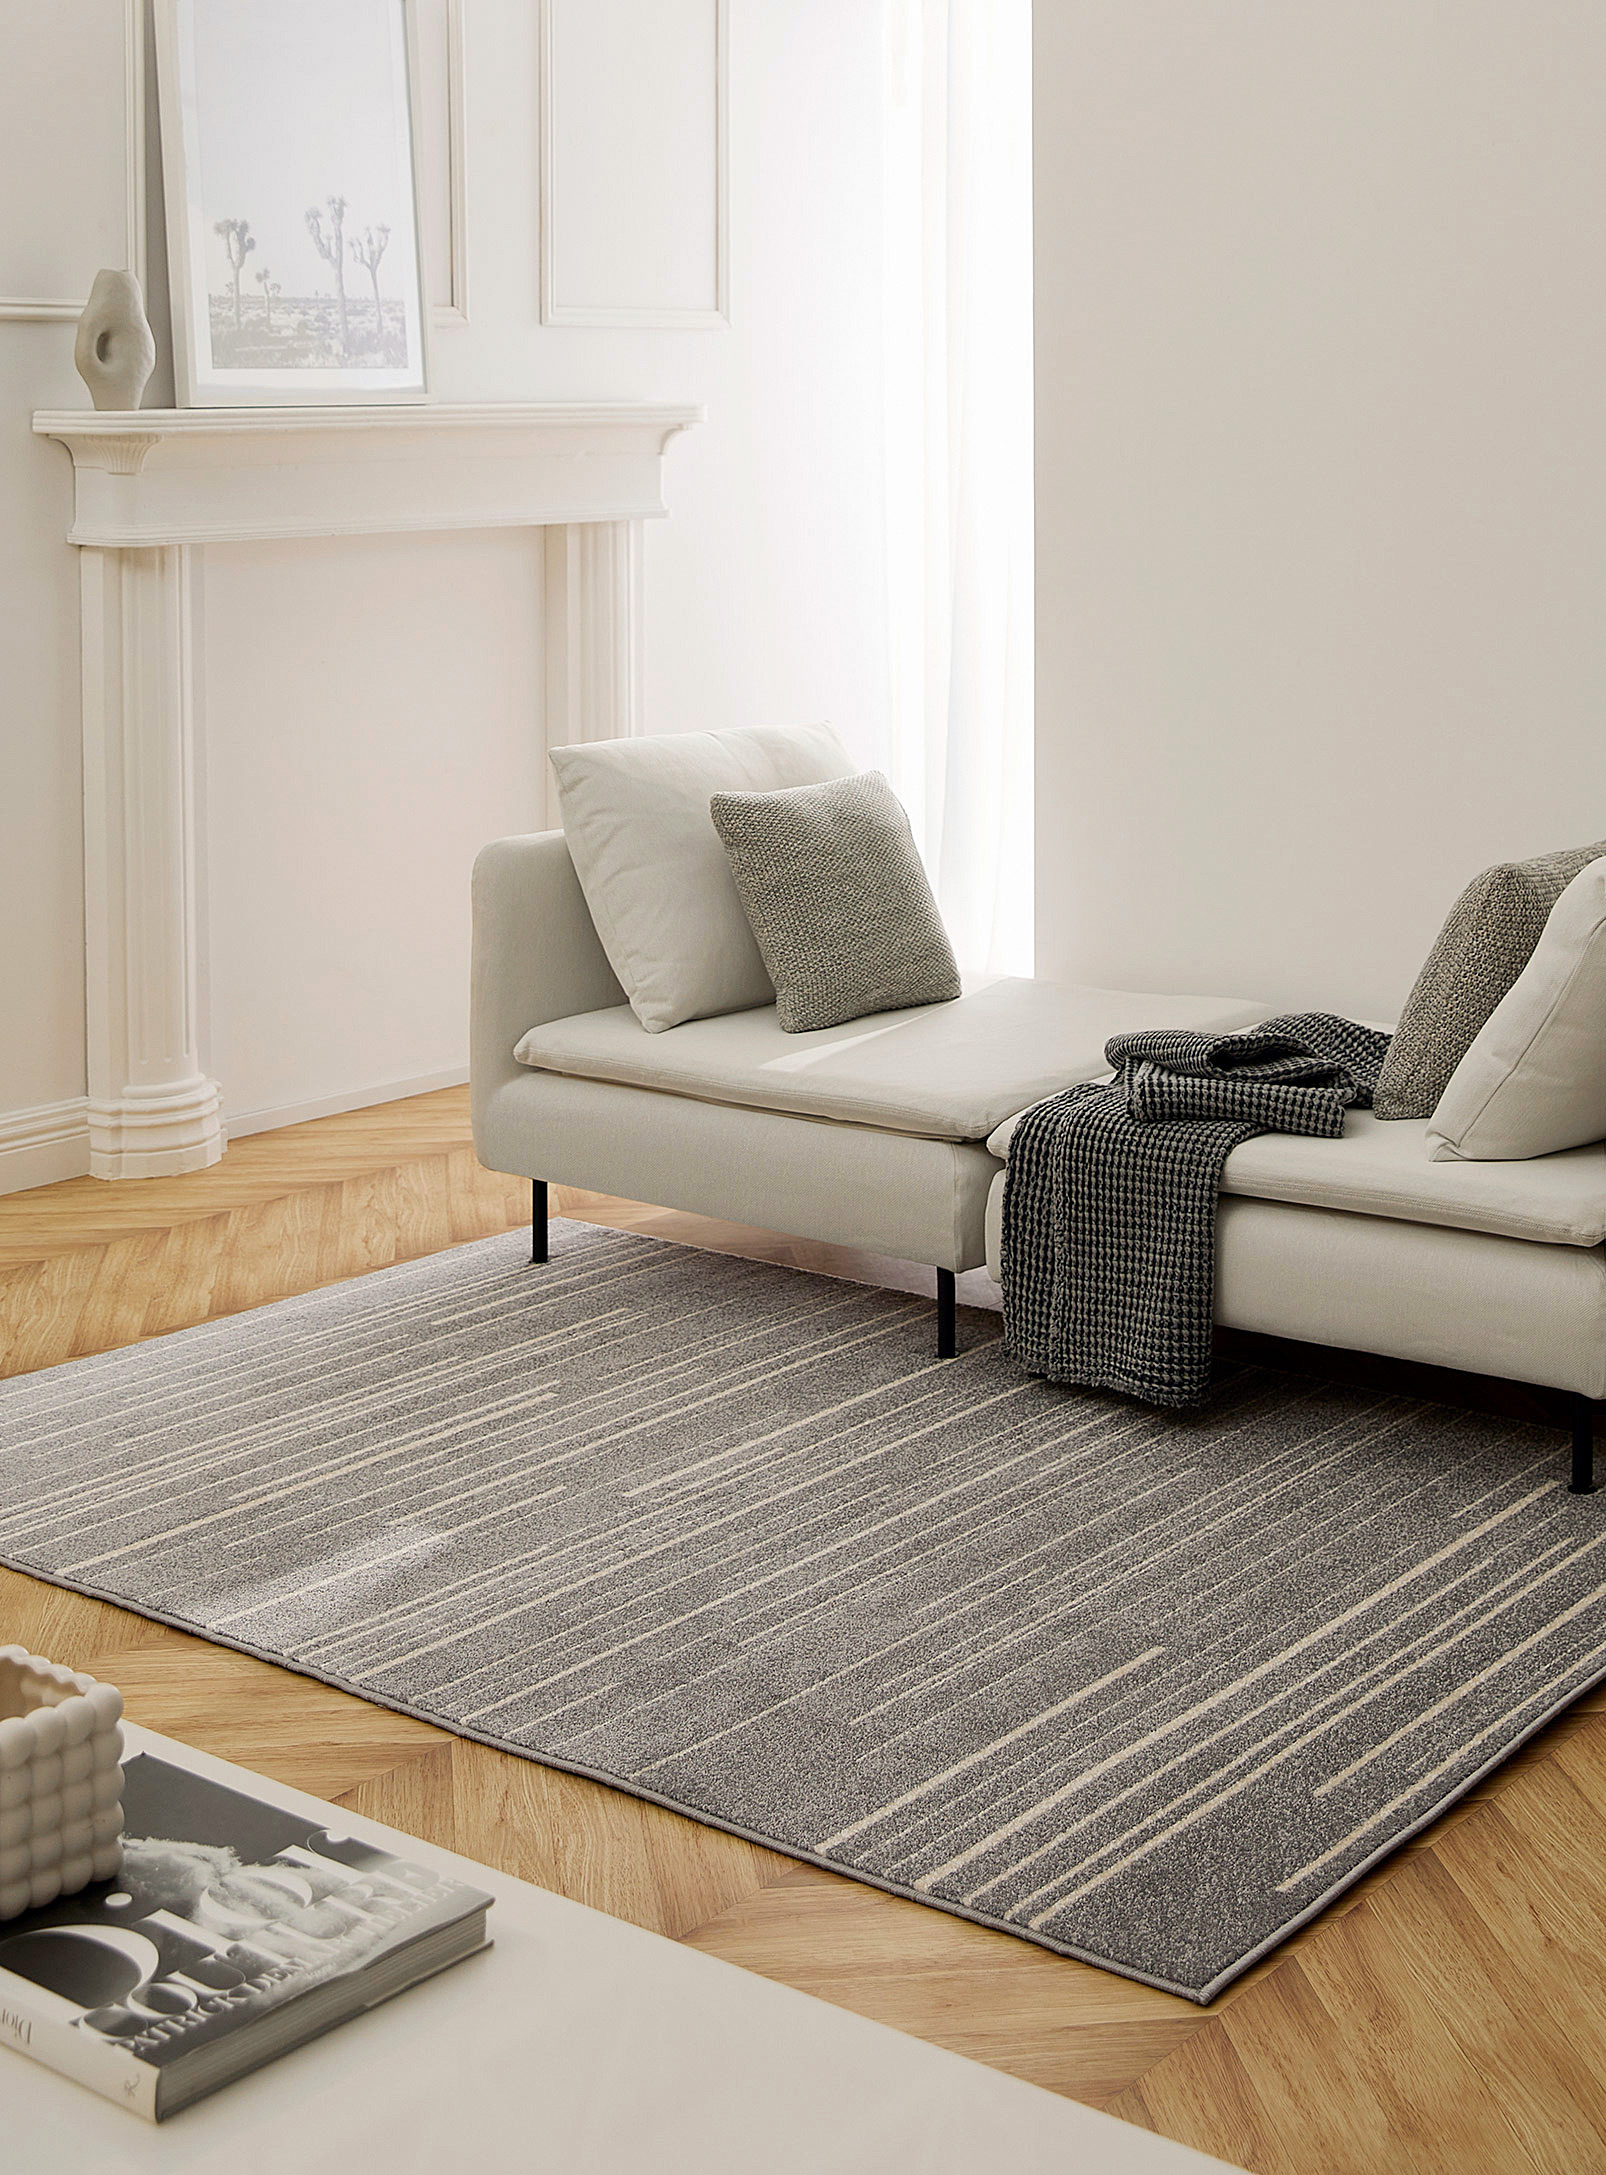 Simons Maison Graphic Lines Rug See Available Sizes In Patterned Grey